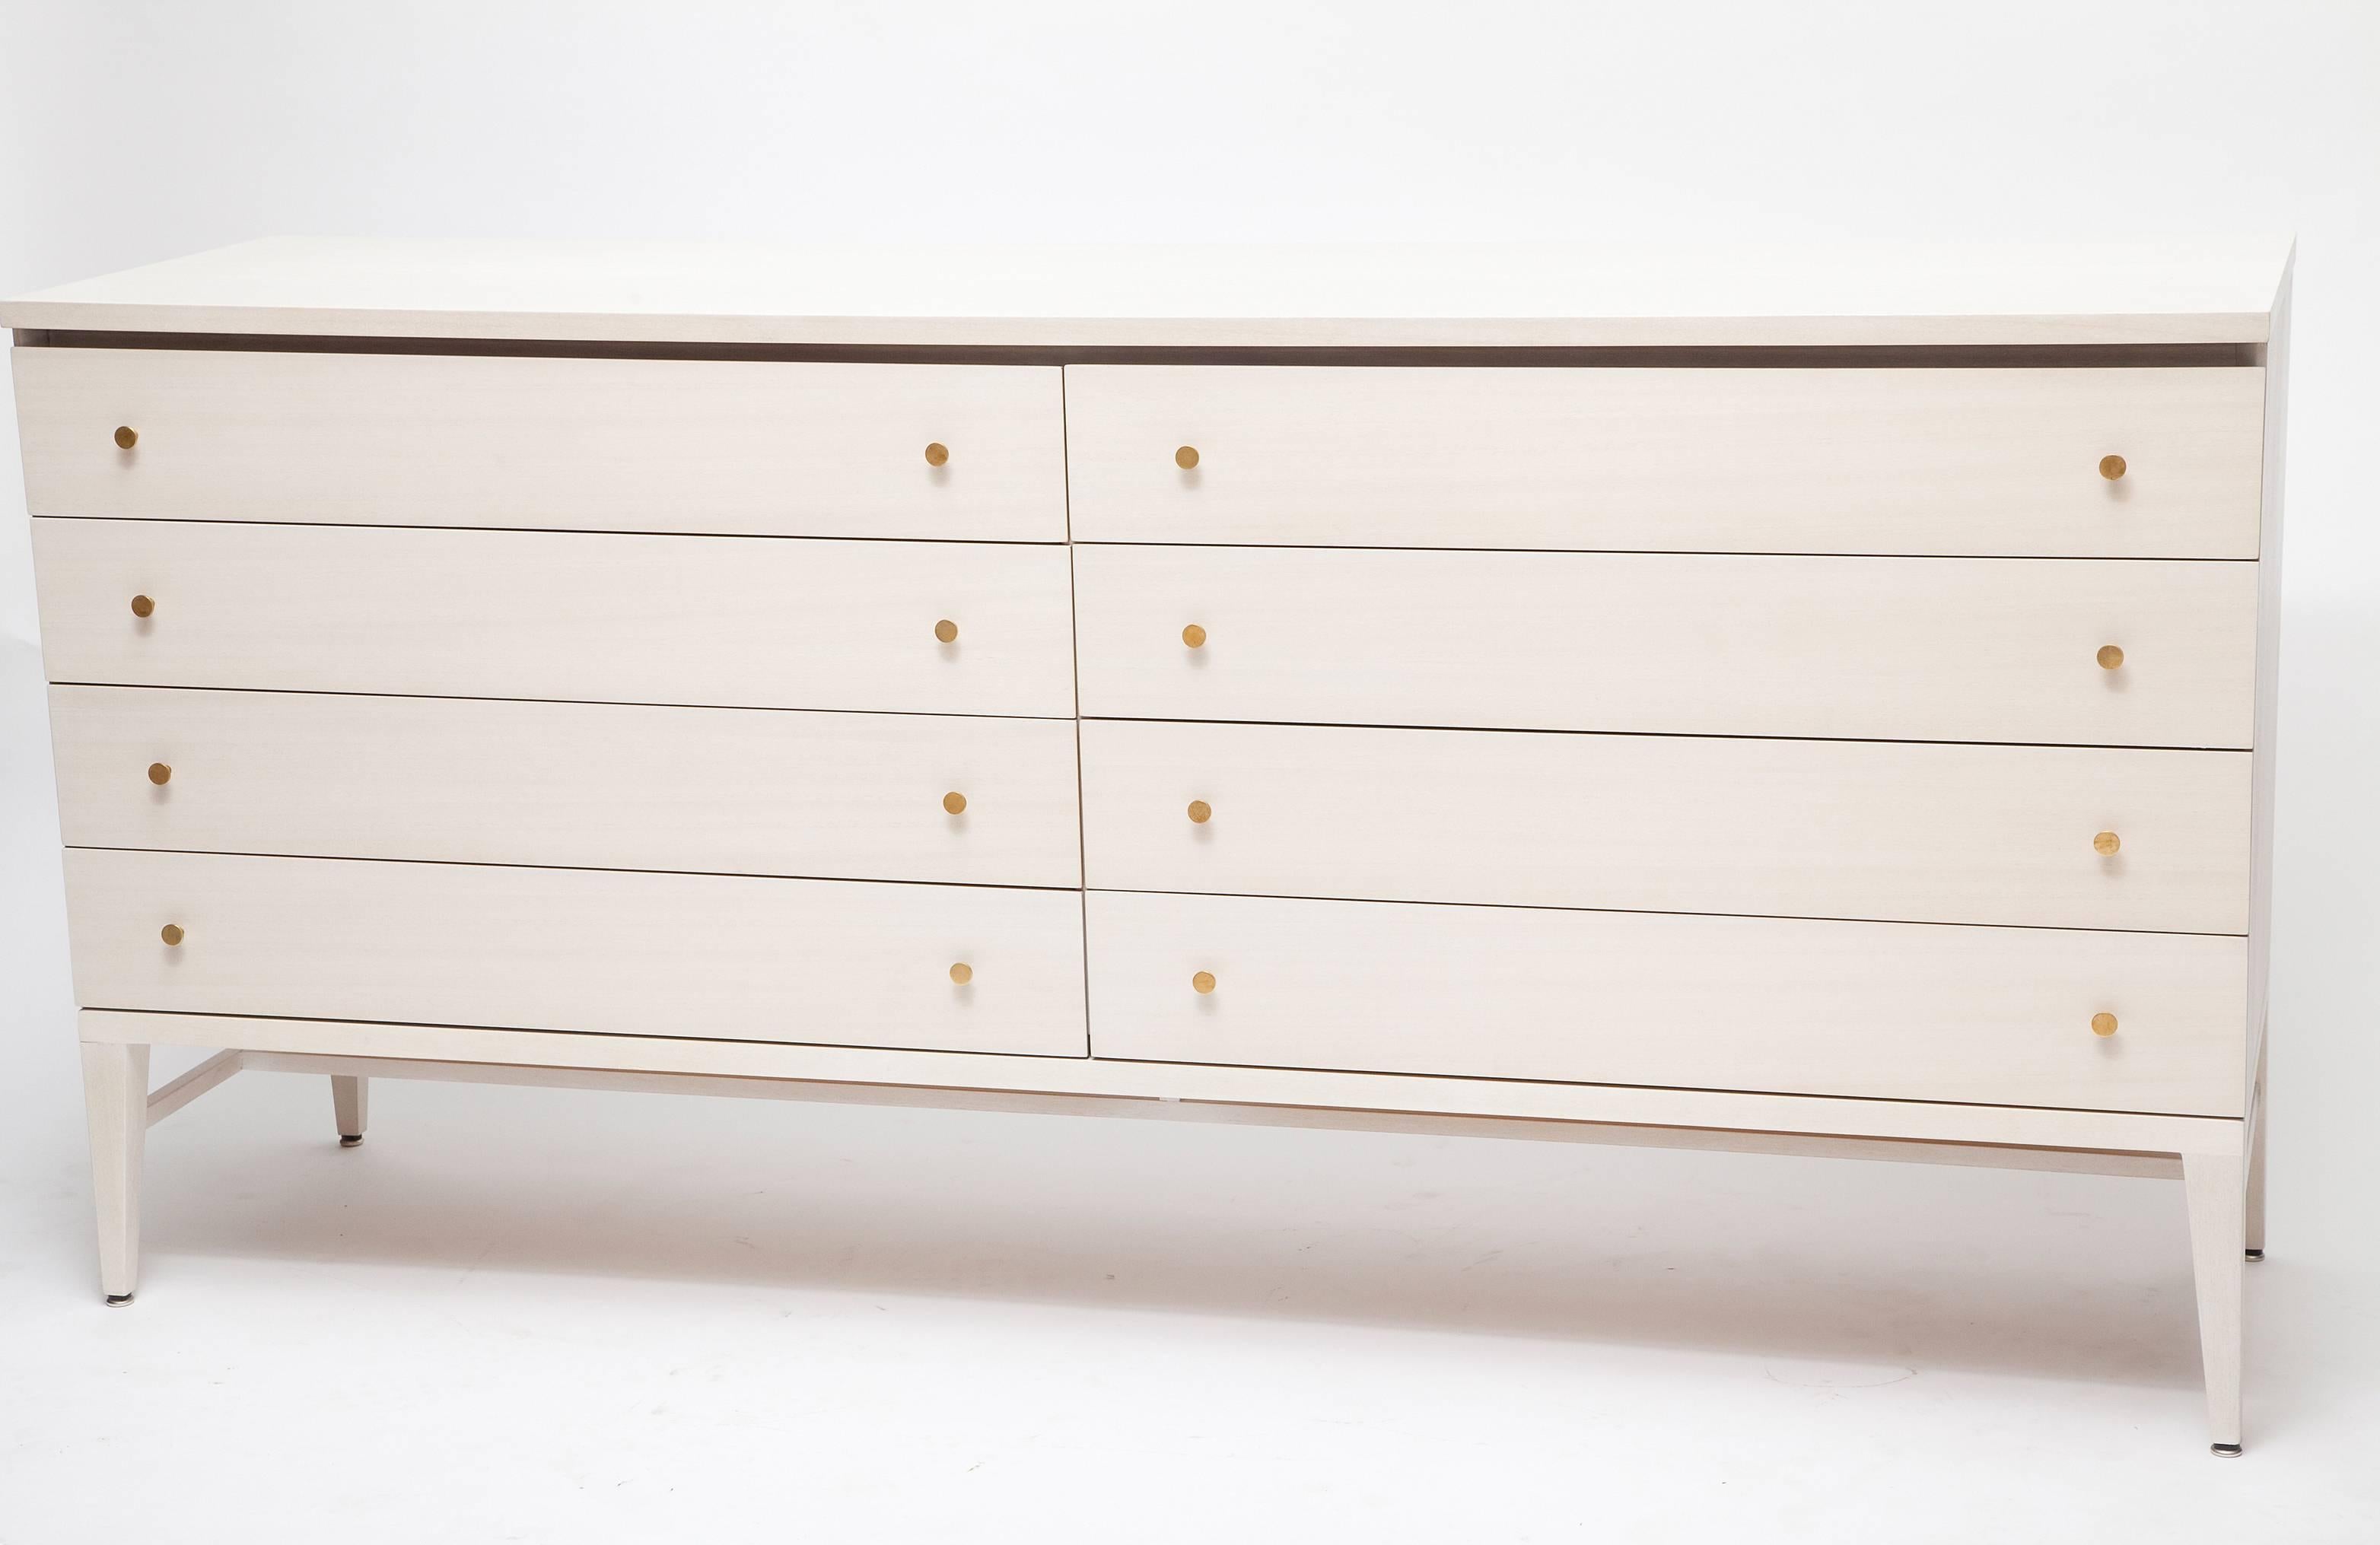 Very special bleached mahogany dresser by Paul McCobb. We've bleached it an additional three times to bring out the dreamiest shades of cream and grey in the grain. A stunner! Original brass hardware, hand-polished.